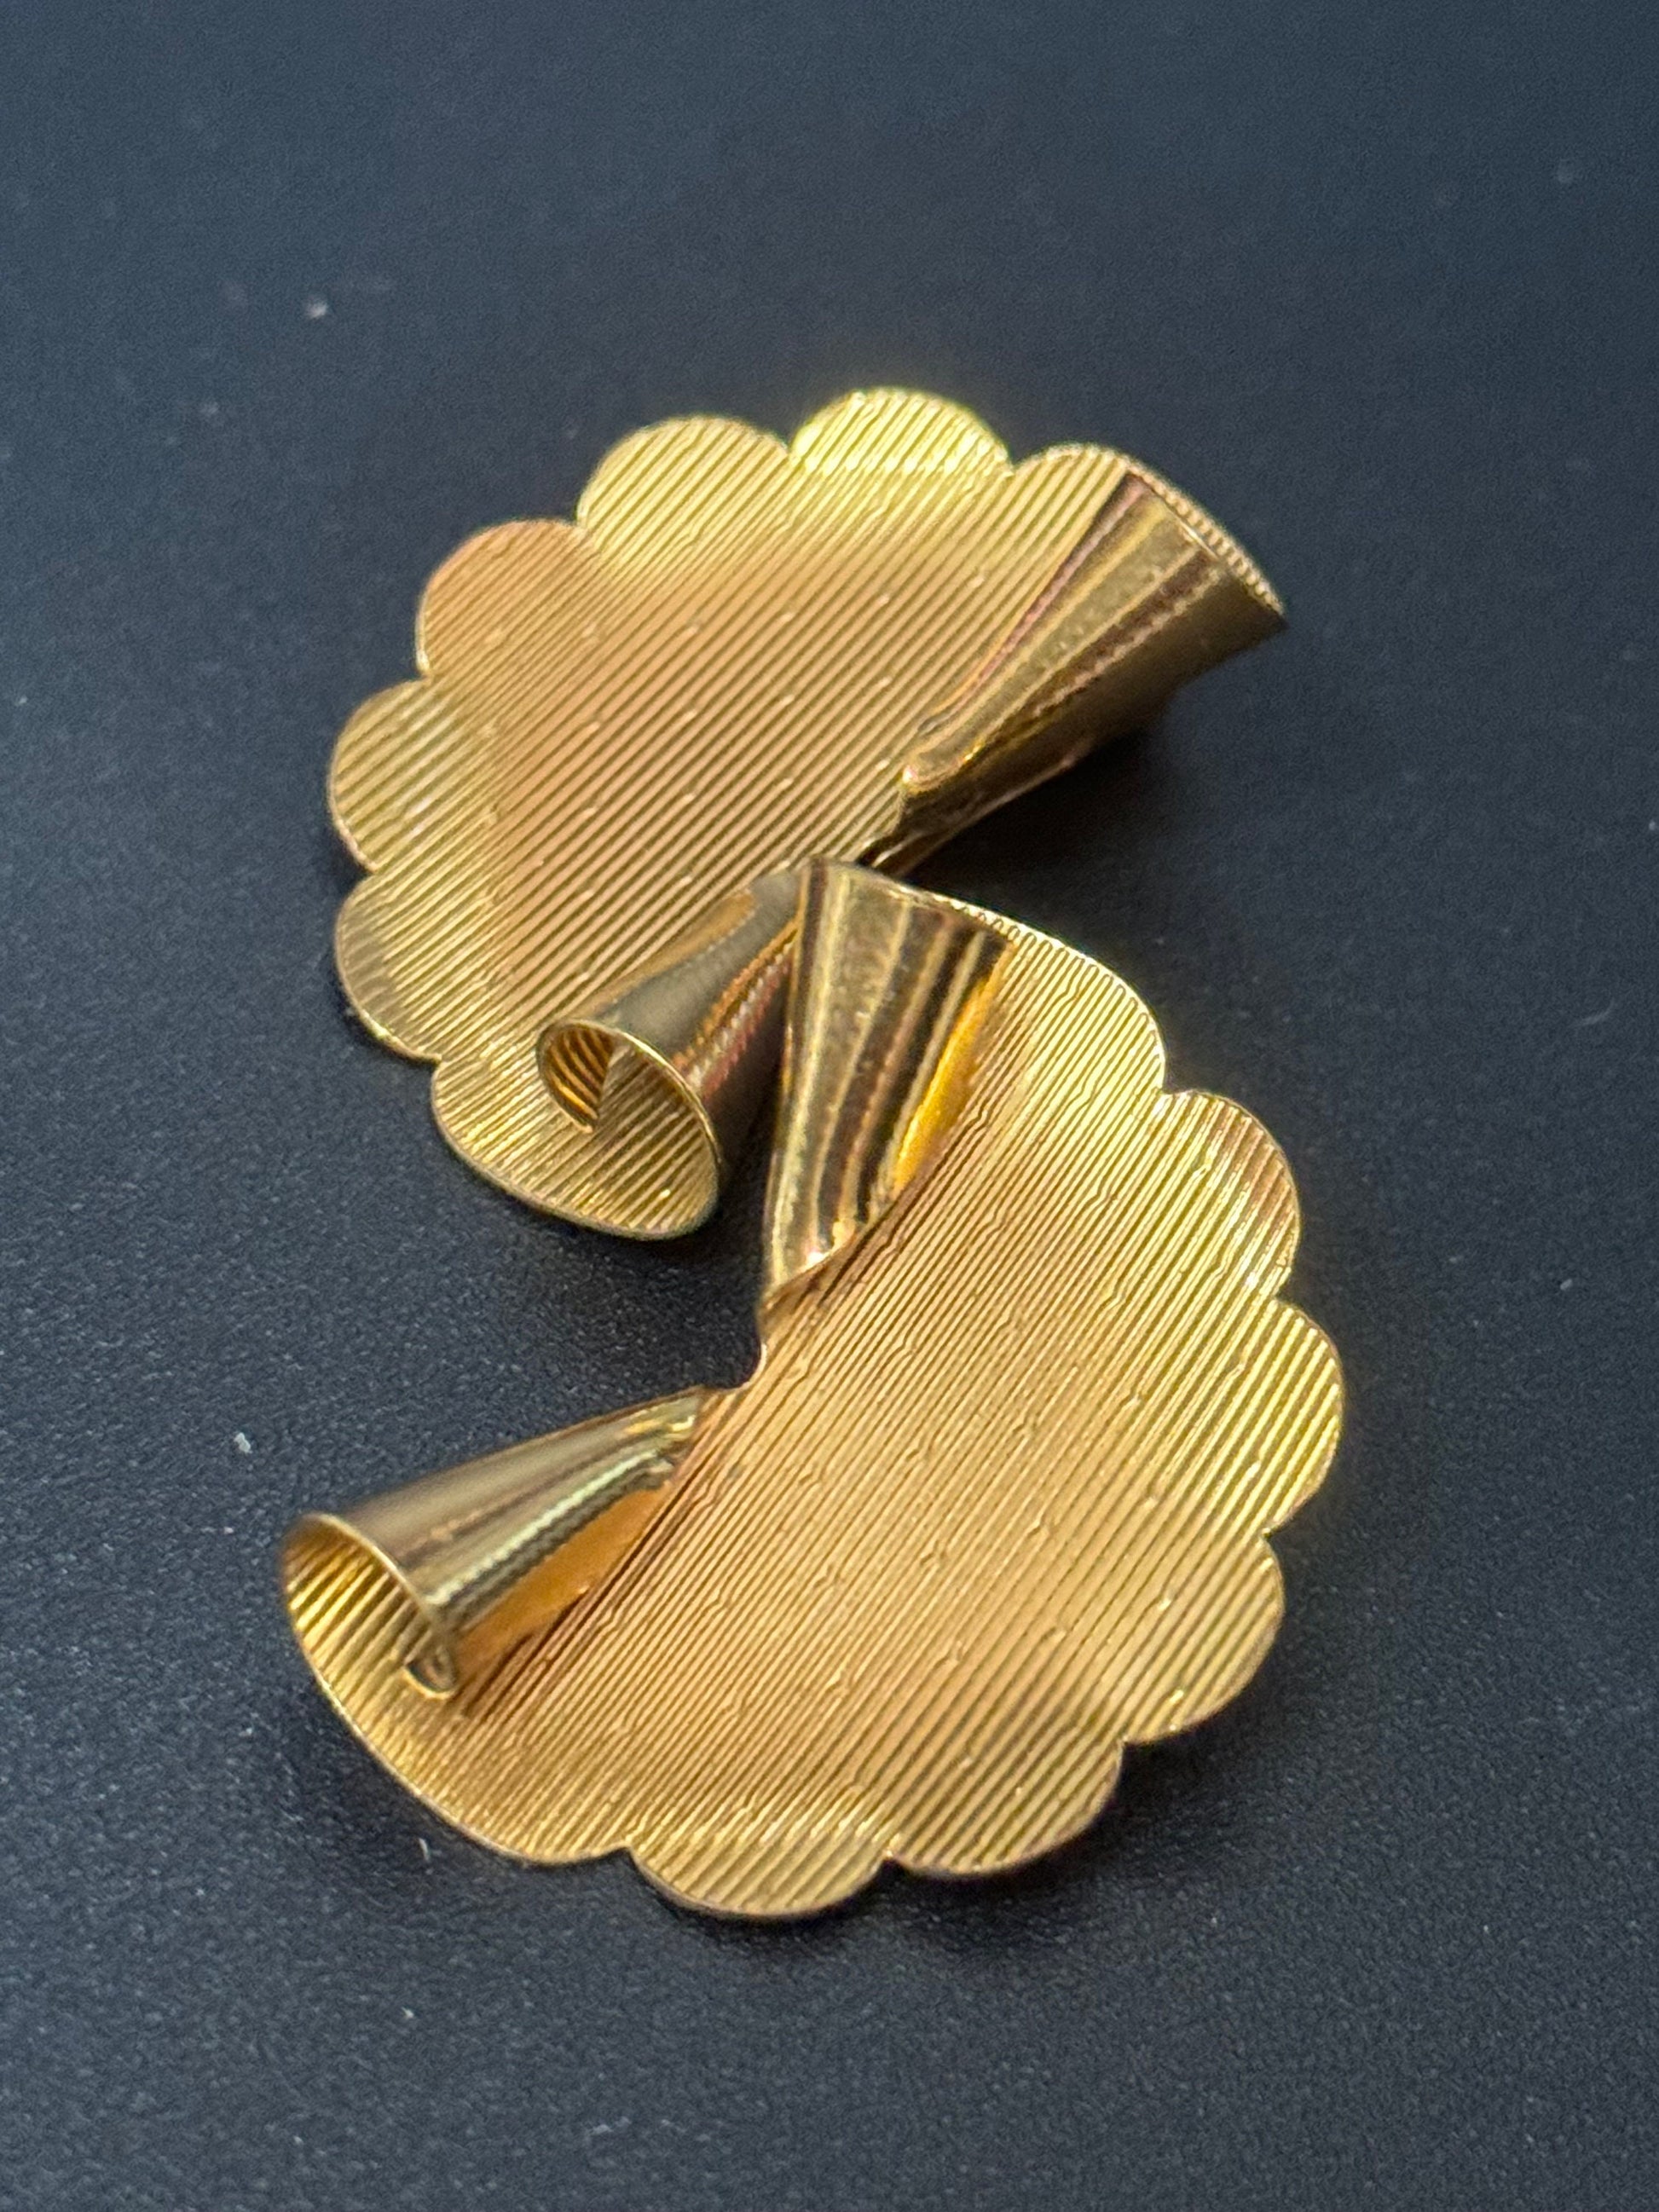 True vintage signed KIGU of London Scalloped oversized fan Clip on earrings 22ct gold plated old shop stock from 1950s